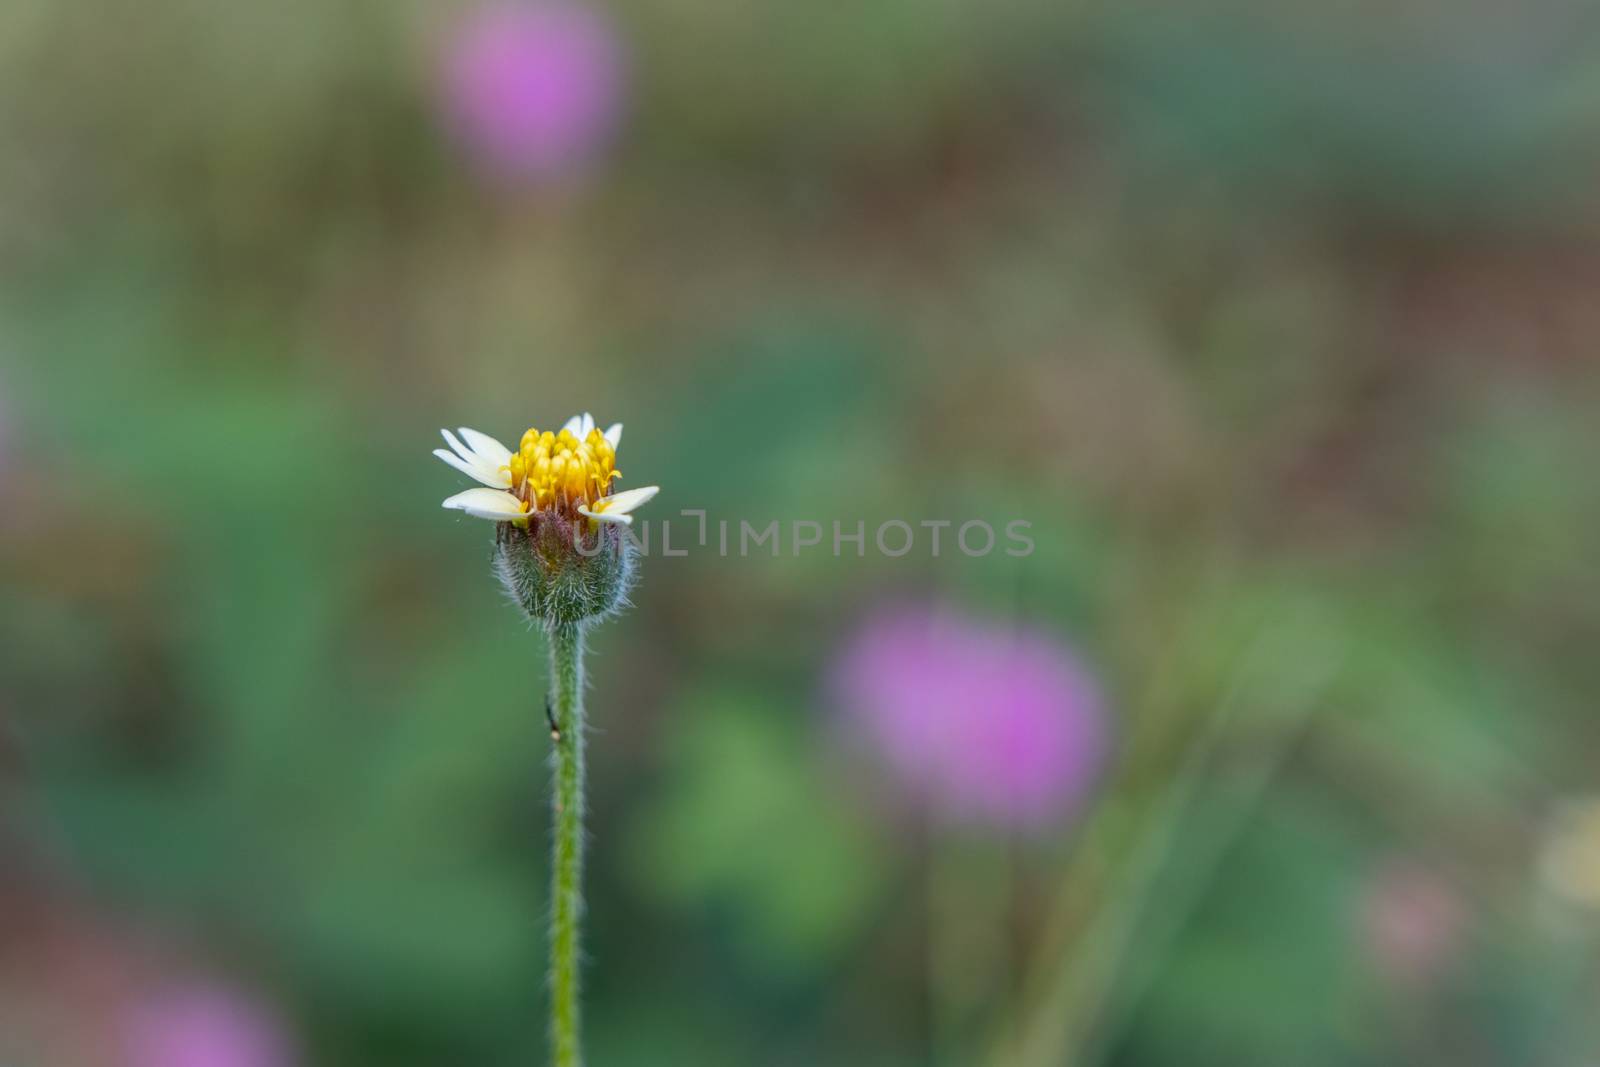 A white wild daisy grass flowers under summer sunlight selective focus green grass field with blur authentic outdoor background